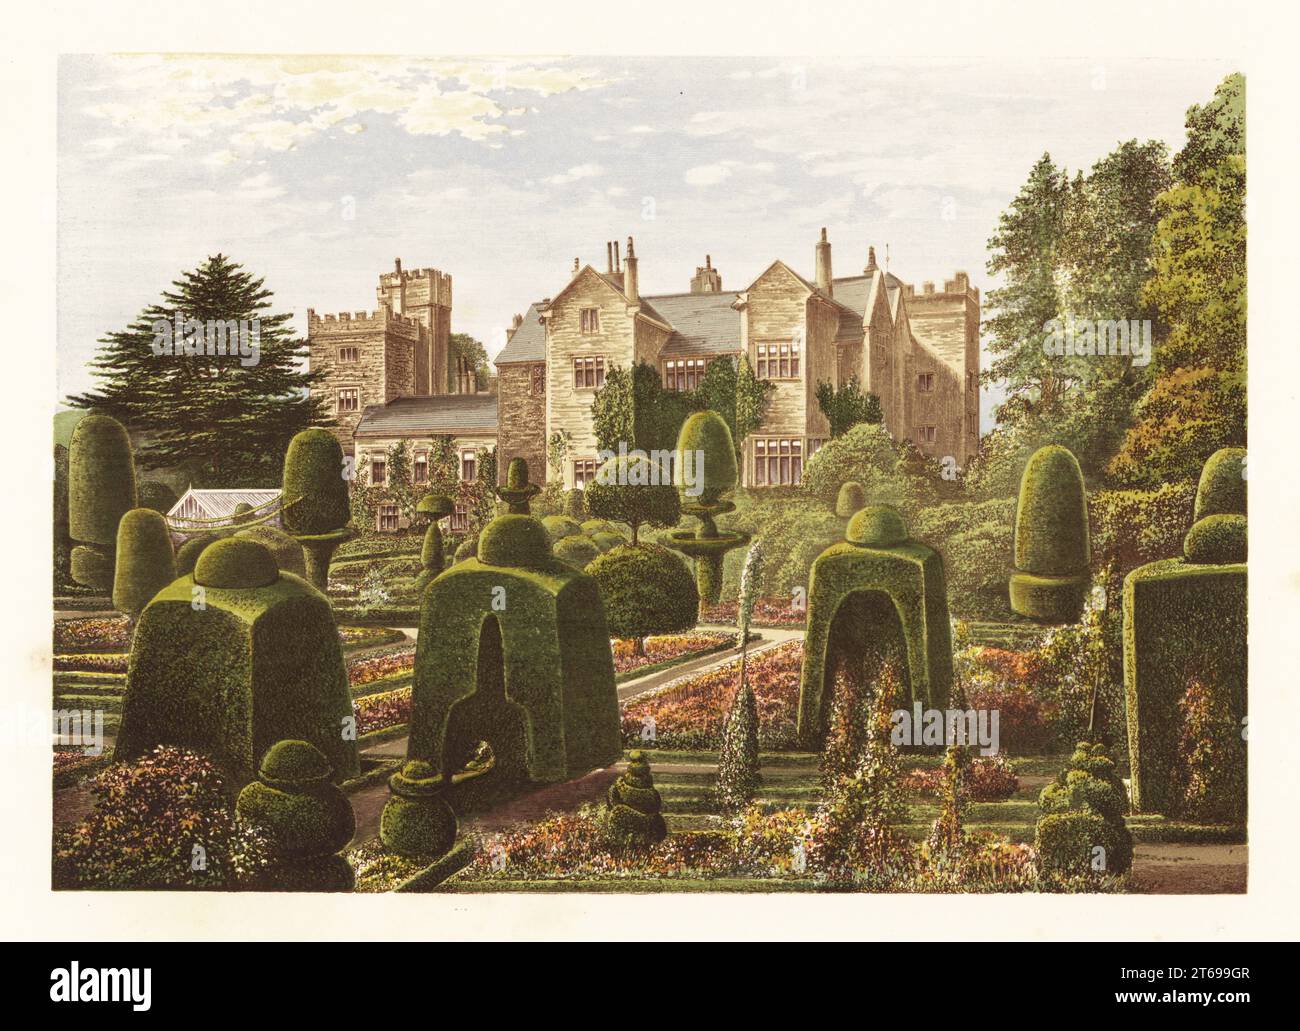 Levens Hall., Cumbria, England. Elizabethan-era house with famous topiary garden laid out by French gardener Guillaume Beaumont in the 17th century. Colour woodblock by Benjamin Fawcett in the Baxter process of an illustration by Alexander Francis Lydon from Reverend Francis Orpen Morriss Picturesque Views of the Seats of Noblemen and Gentlemen of Great Britain and Ireland, William Mackenzie, London, 1880. Stock Photo